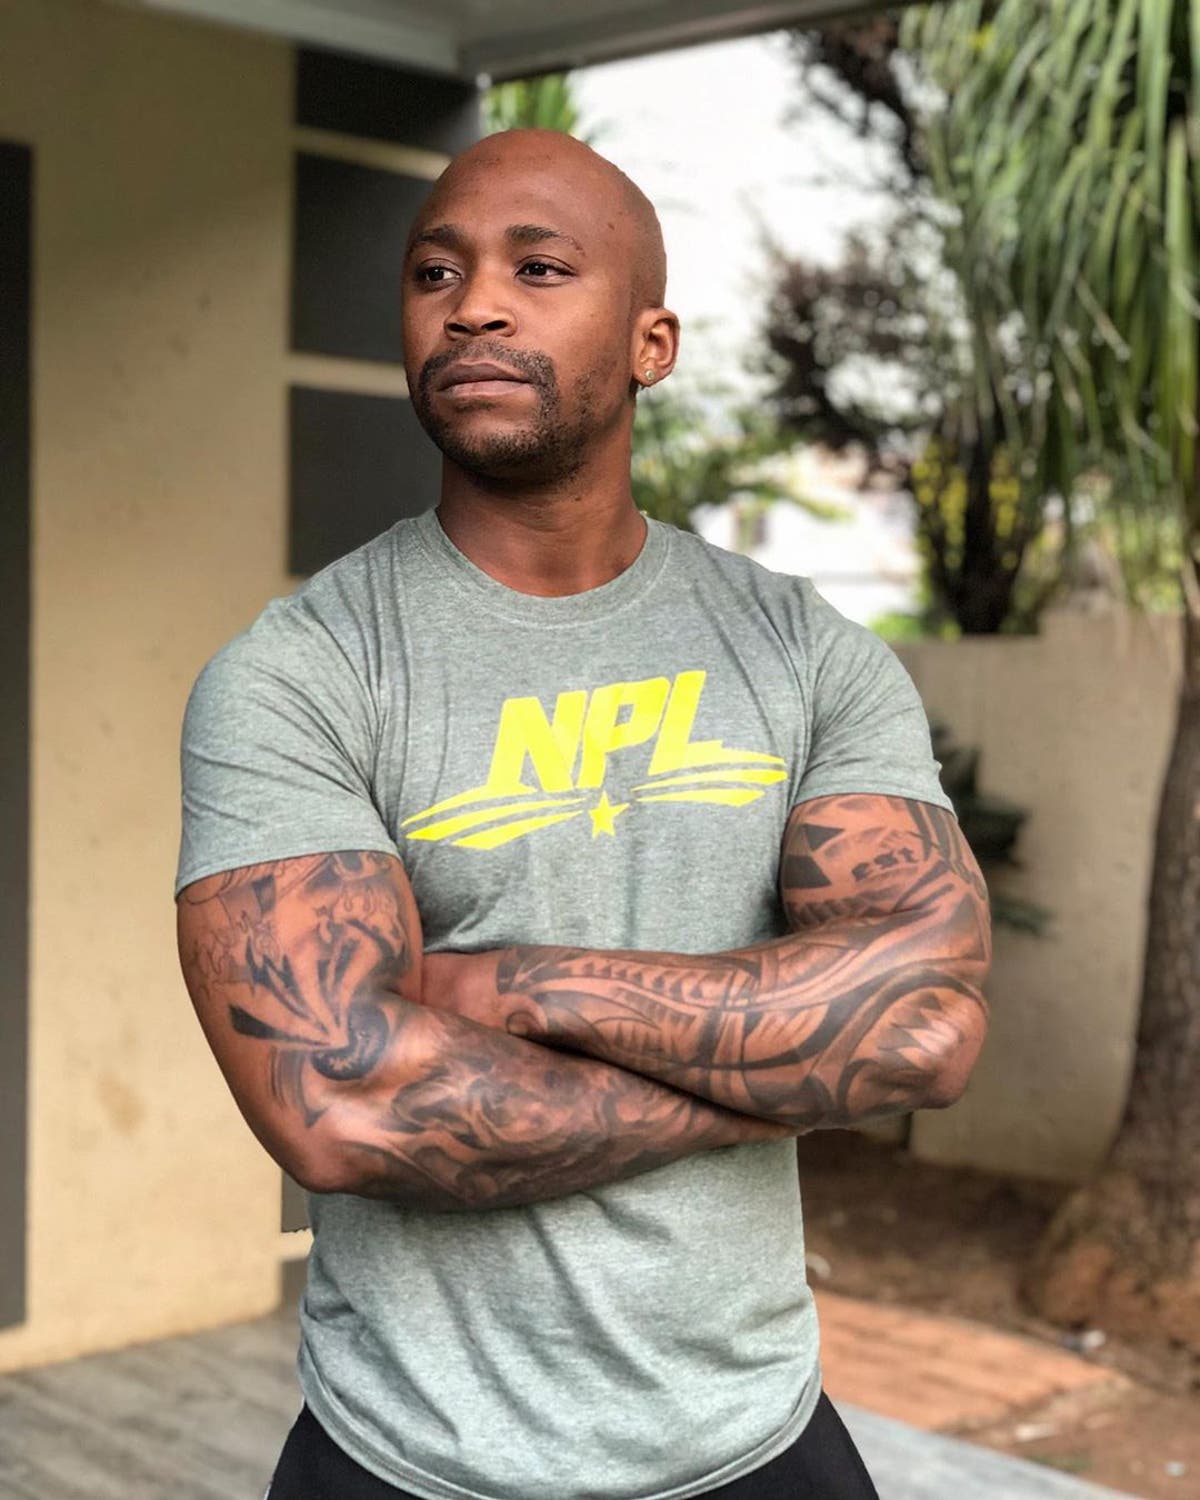 Naak Musiq shows off his hot House - Pictures - News365.co.za